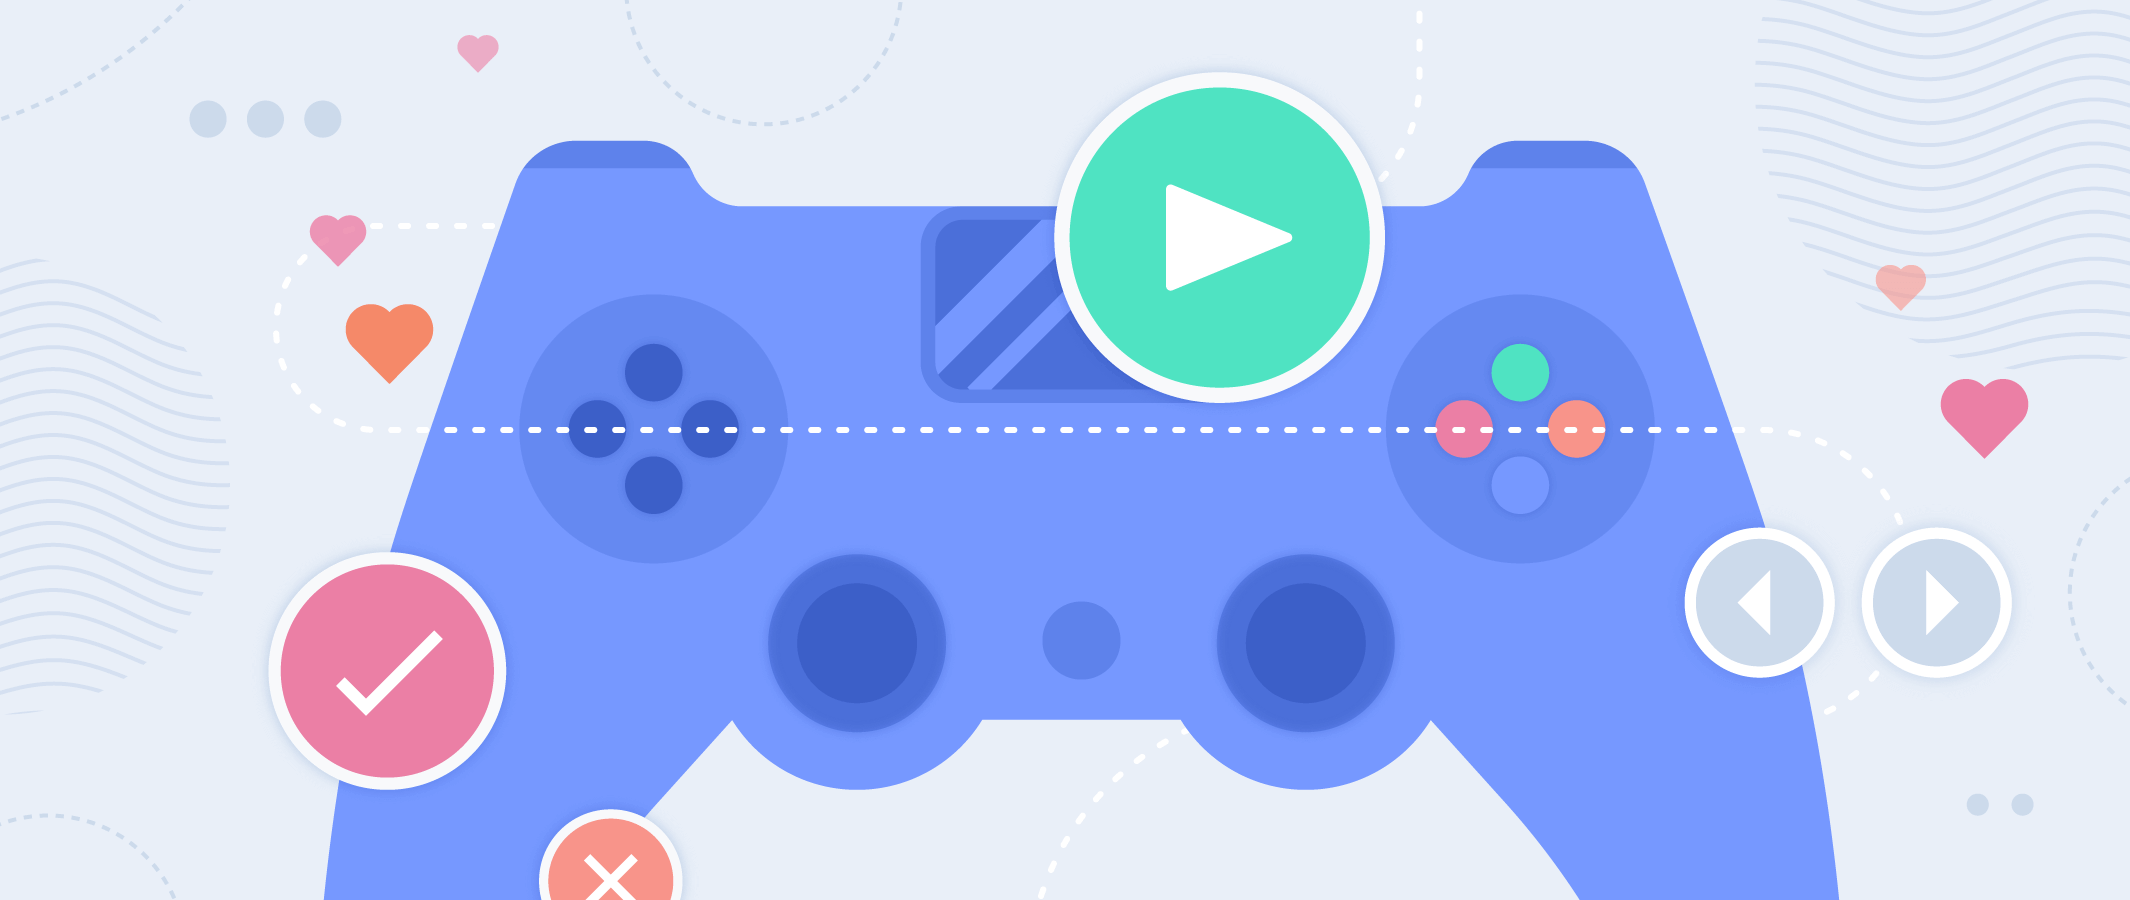 Test Automation for Video Games: Things to Consider Before You